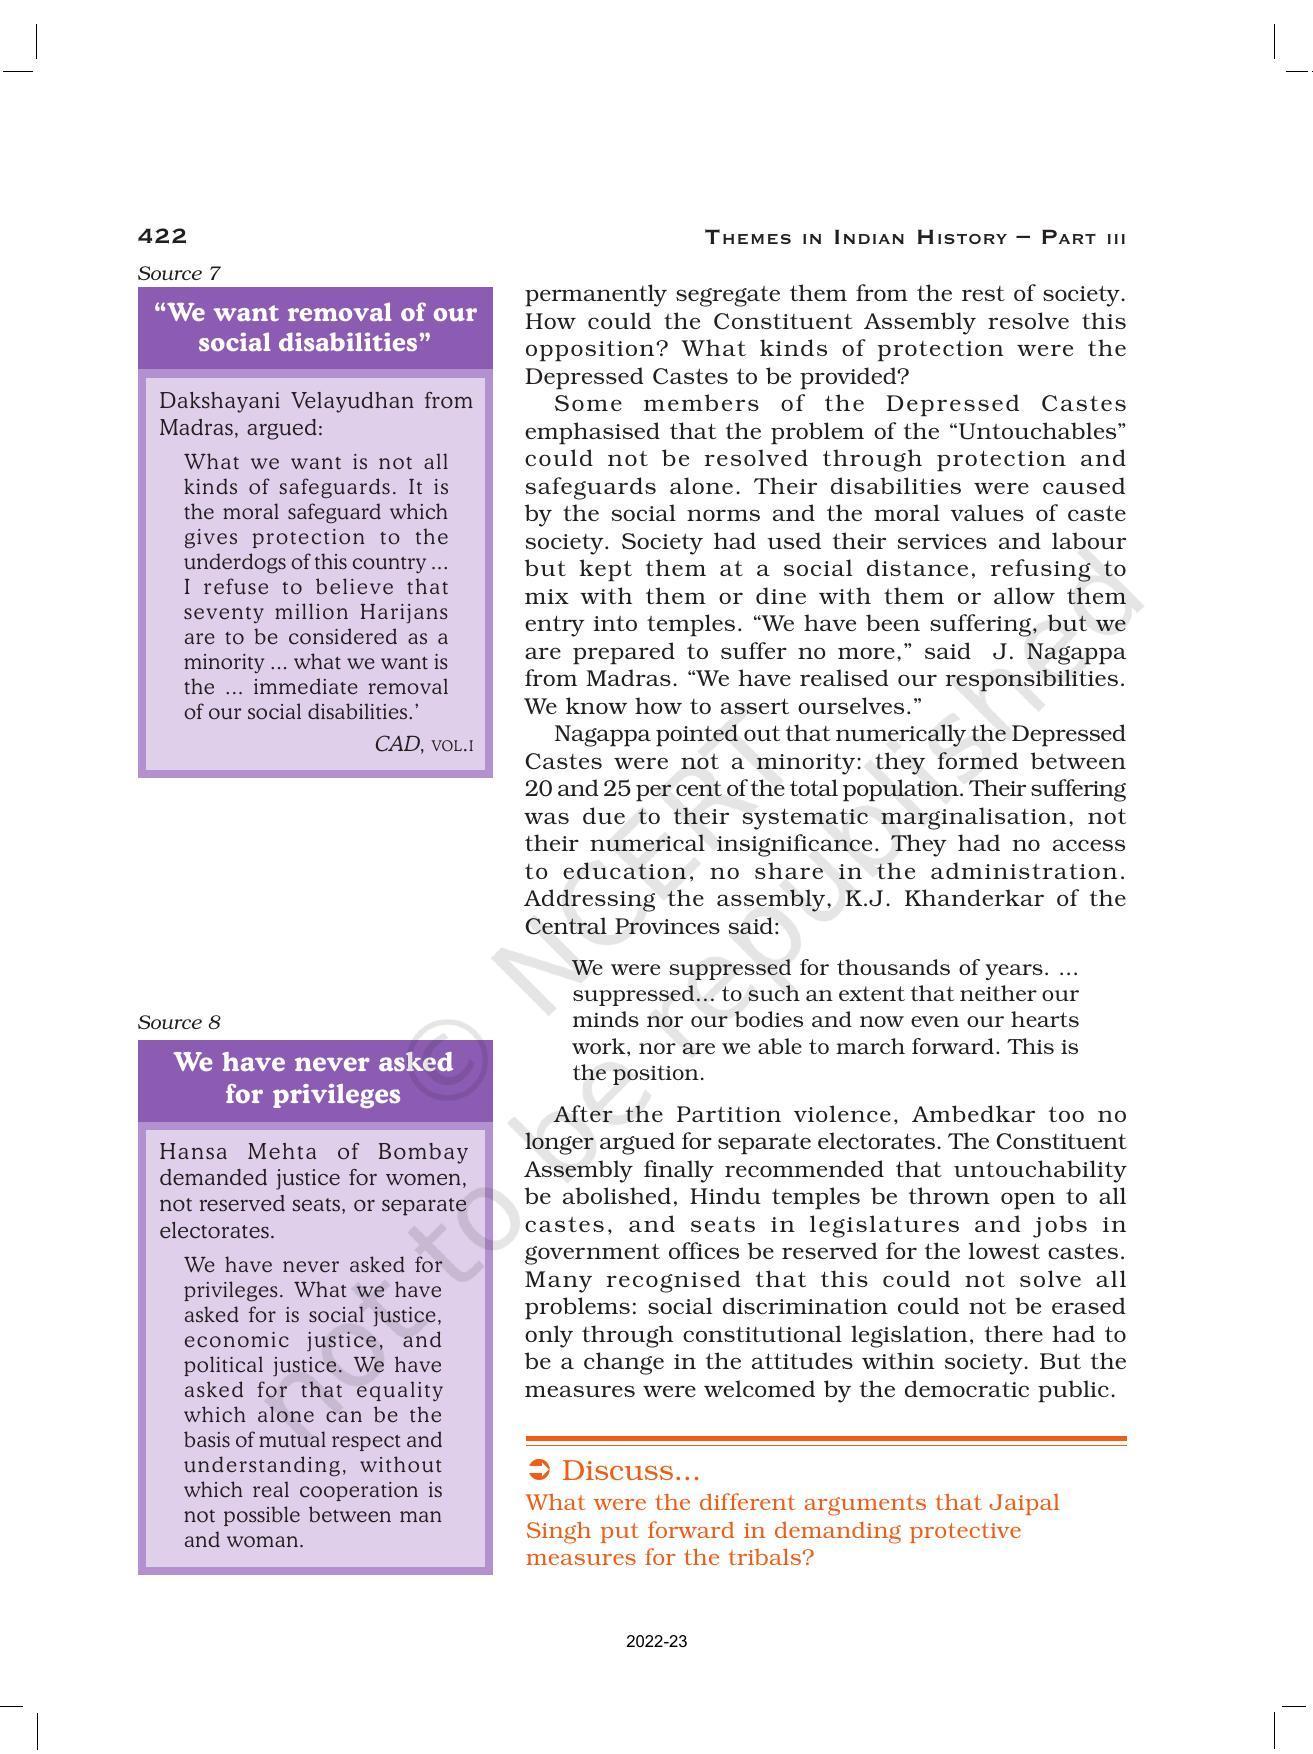 NCERT Book for Class 12 History (Part-III) Chapter 15 Framing and the Constitution - Page 18